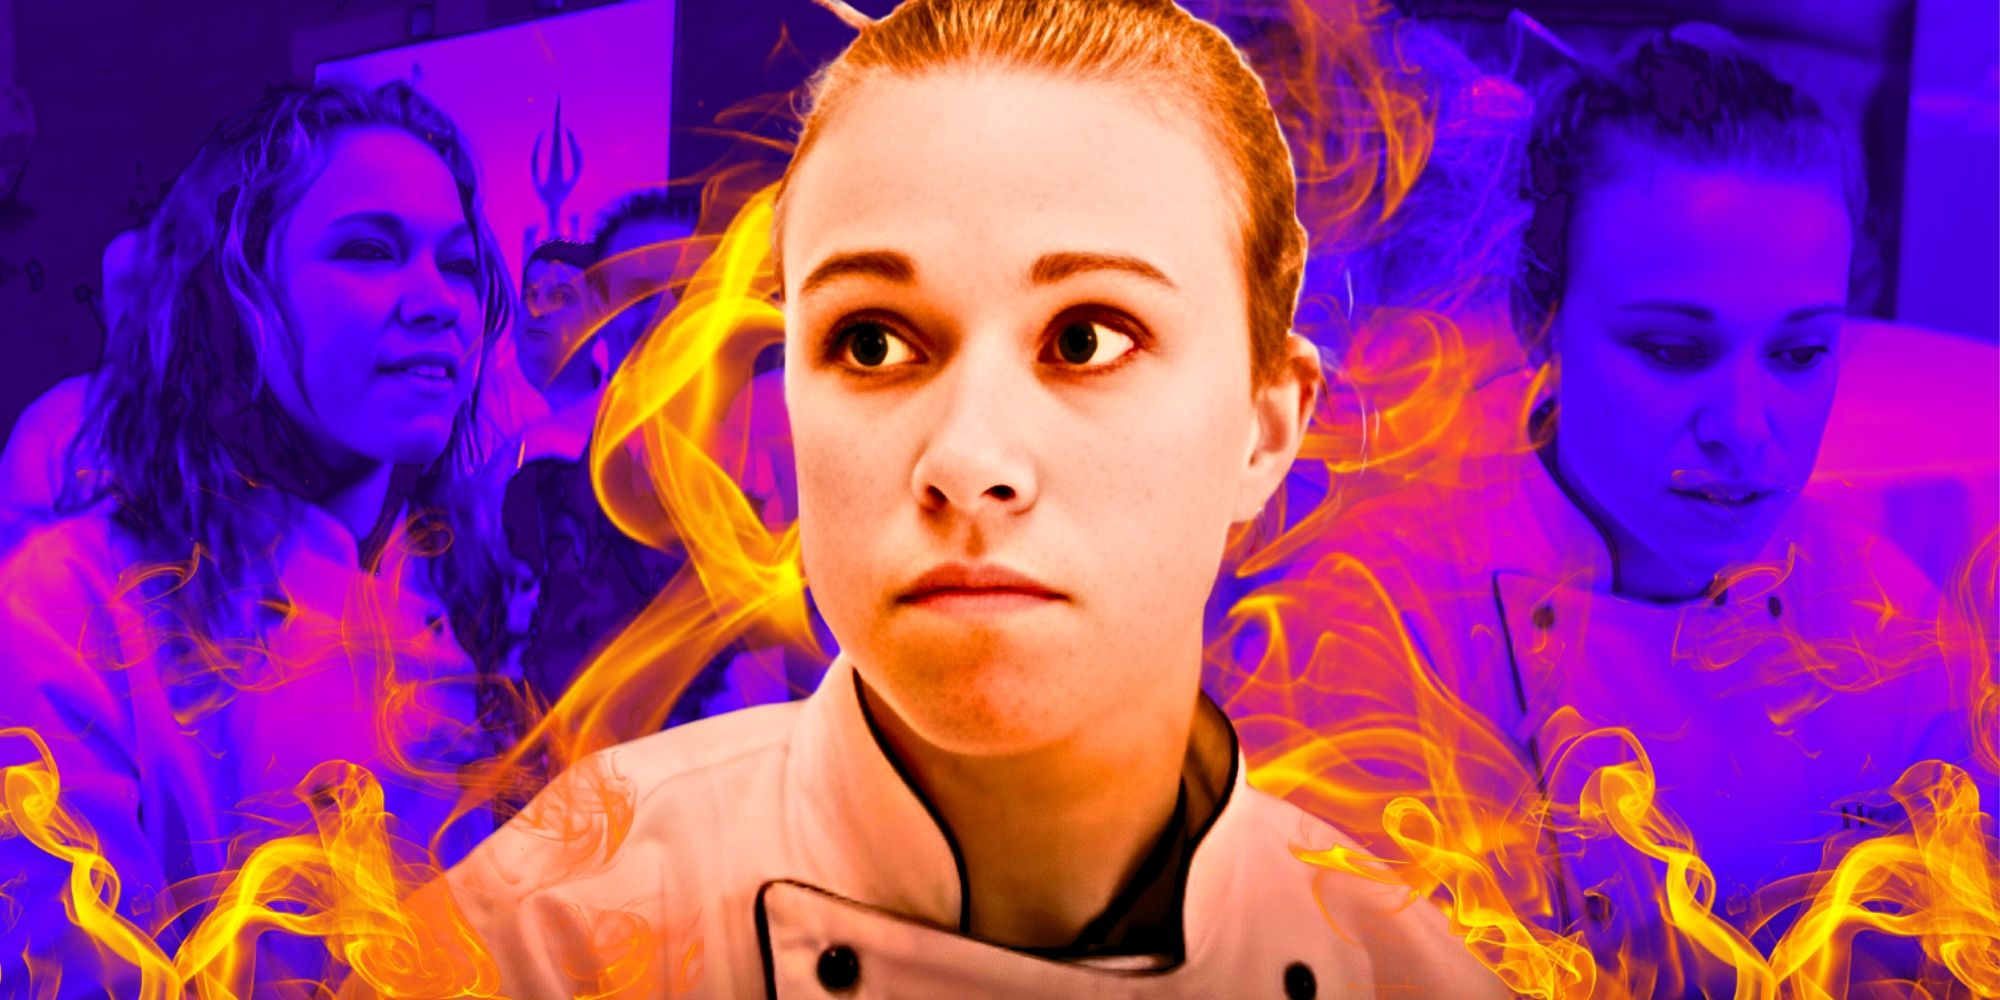 Hell's Kitchen_ What Happened To Season 2 Winner Heather West & Terra Rossa_ note- currently out of sync so make sure embeds are good before republishing